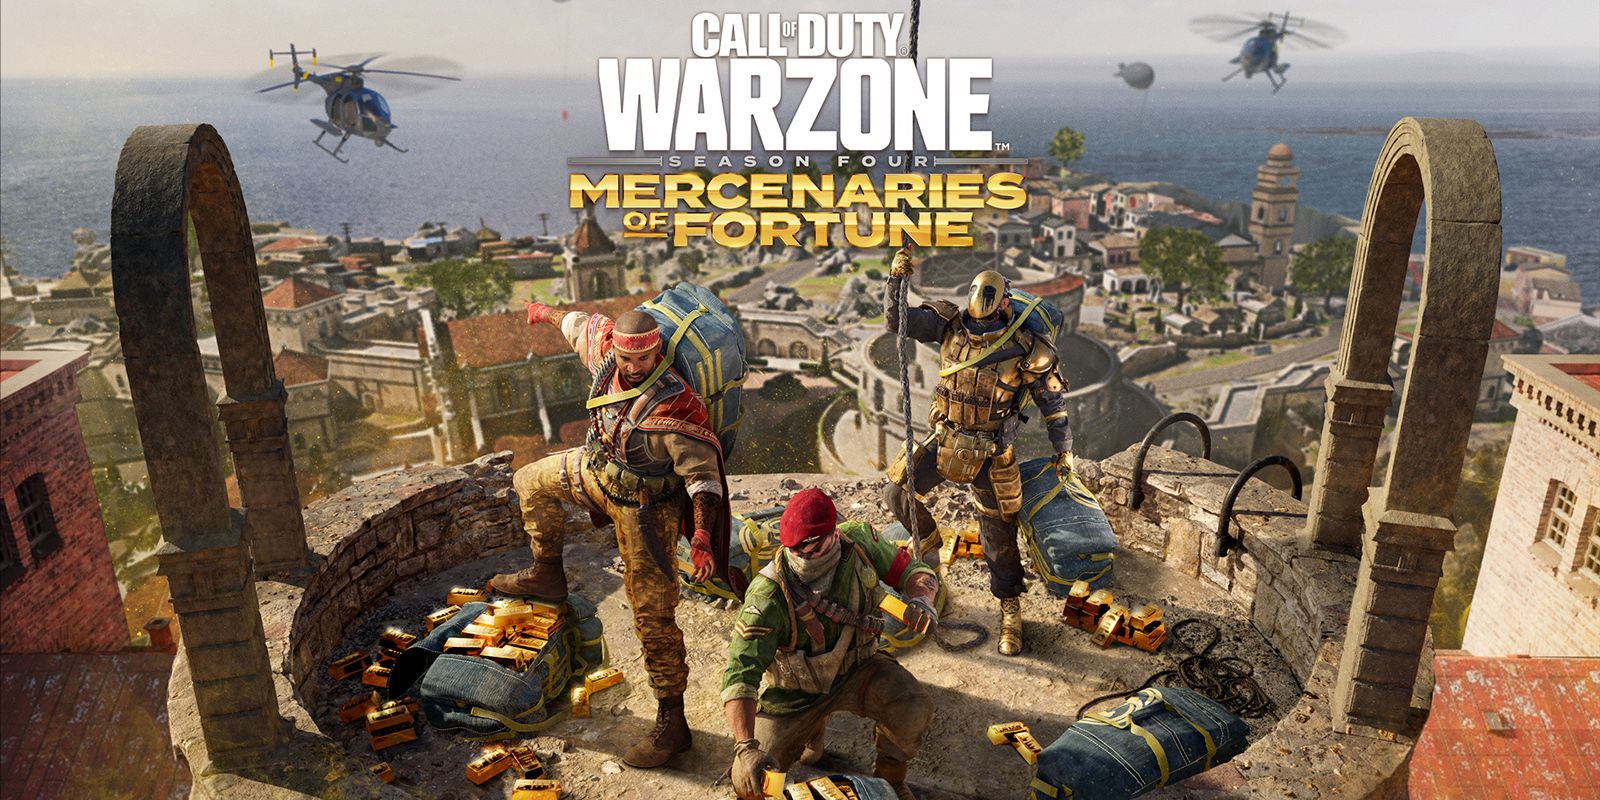 Call of Duty Warzone Season 4 Mercenaries of Fortune Fortunes Keep New Map Announcement